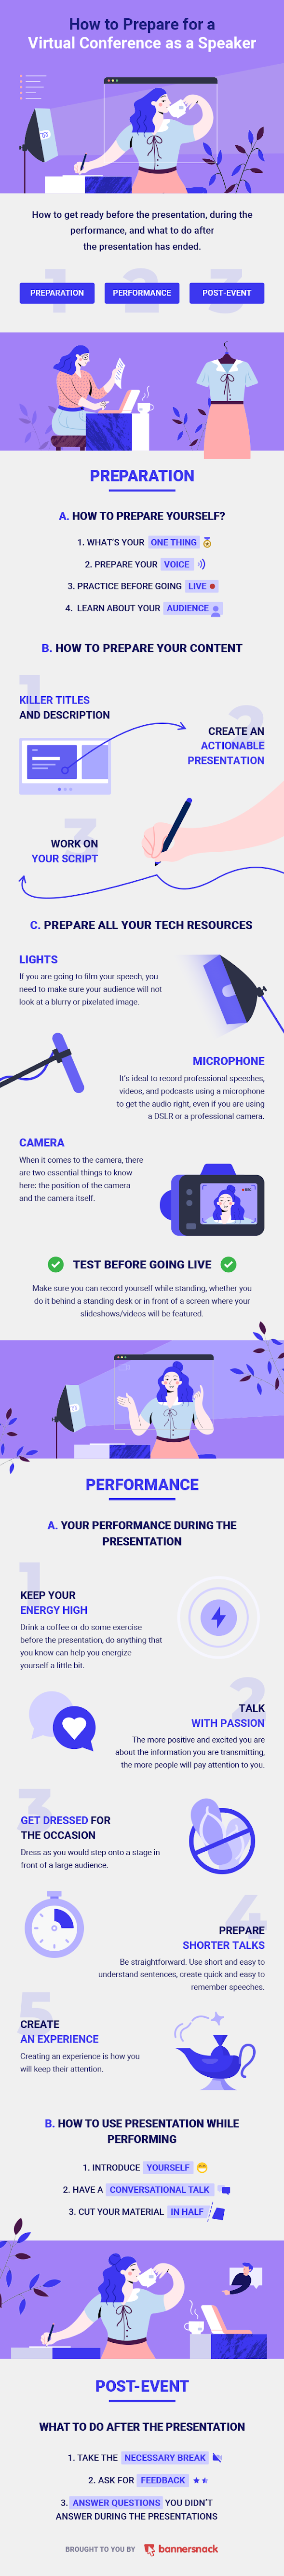 How to Host a Virtual Conference Successfully - Infographic